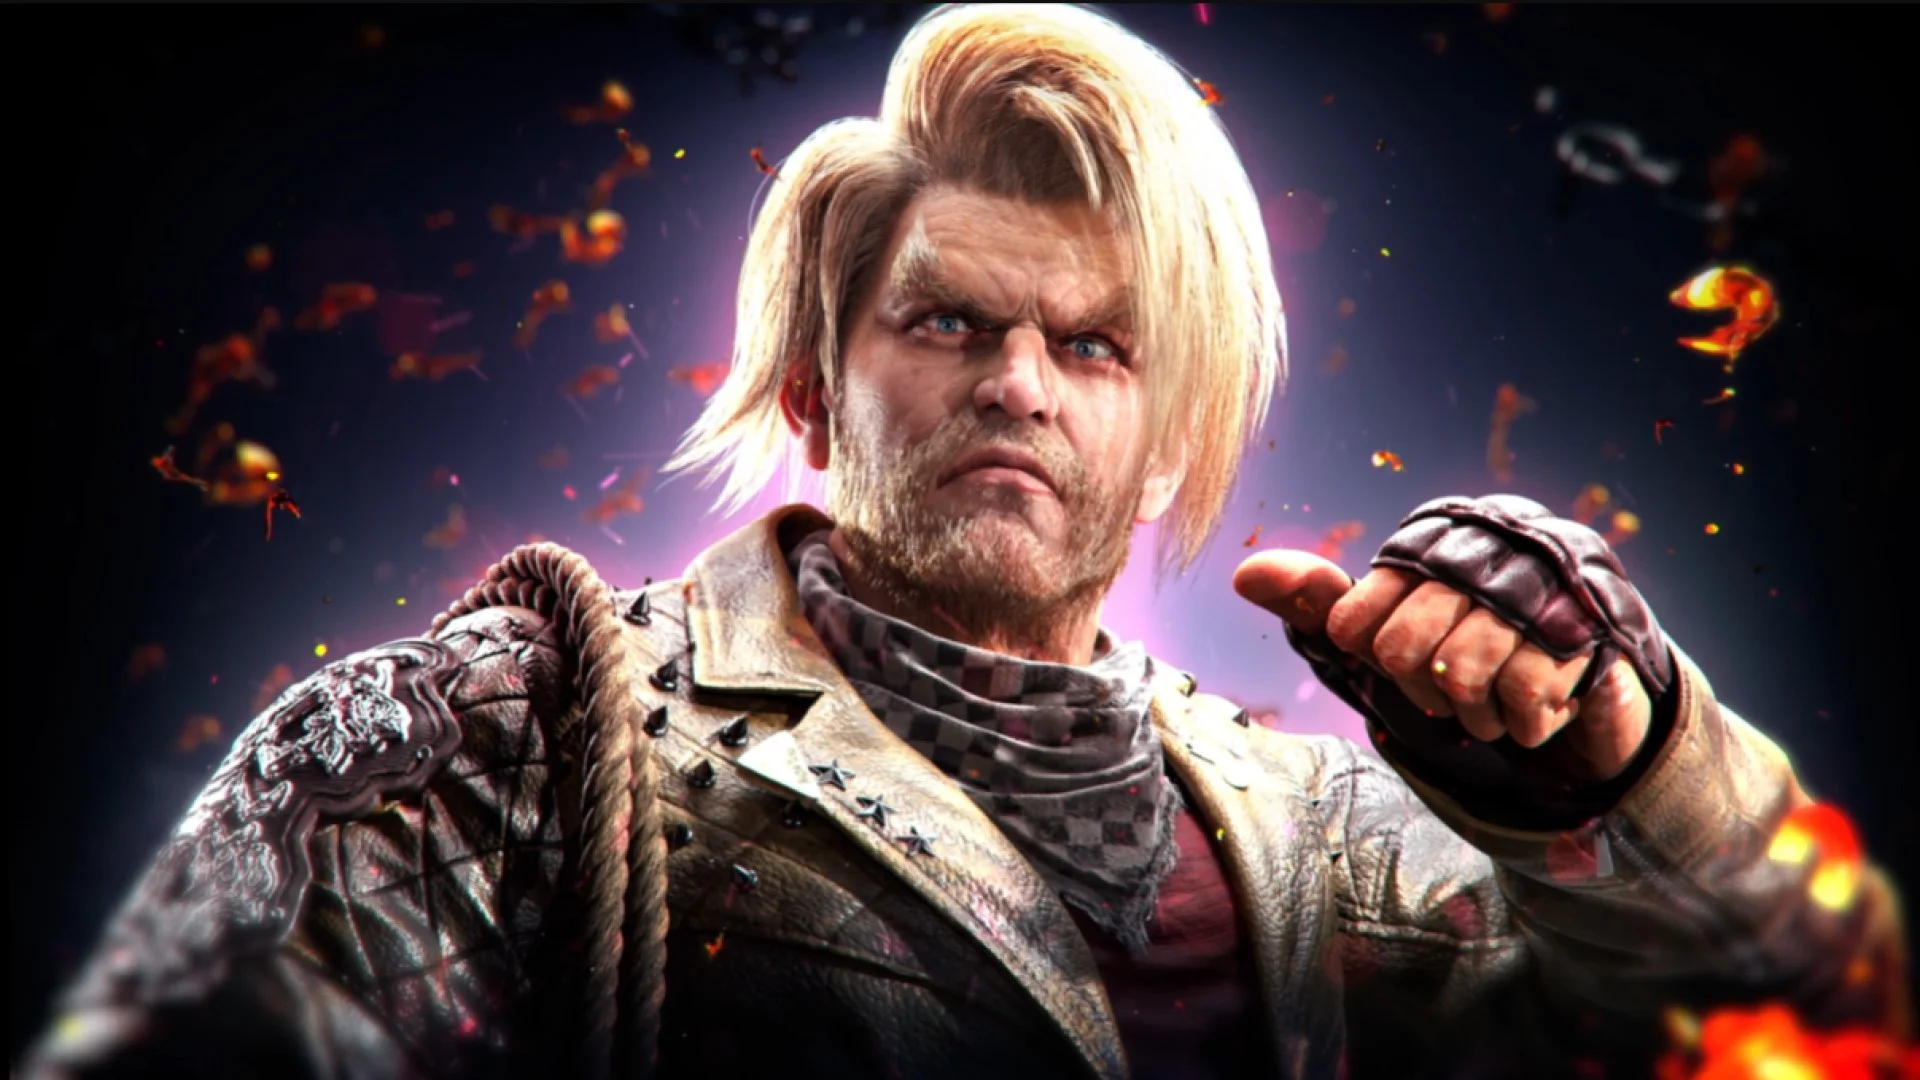 A new Tekken 8 trailer has been released. You can see a familiar fighter in it